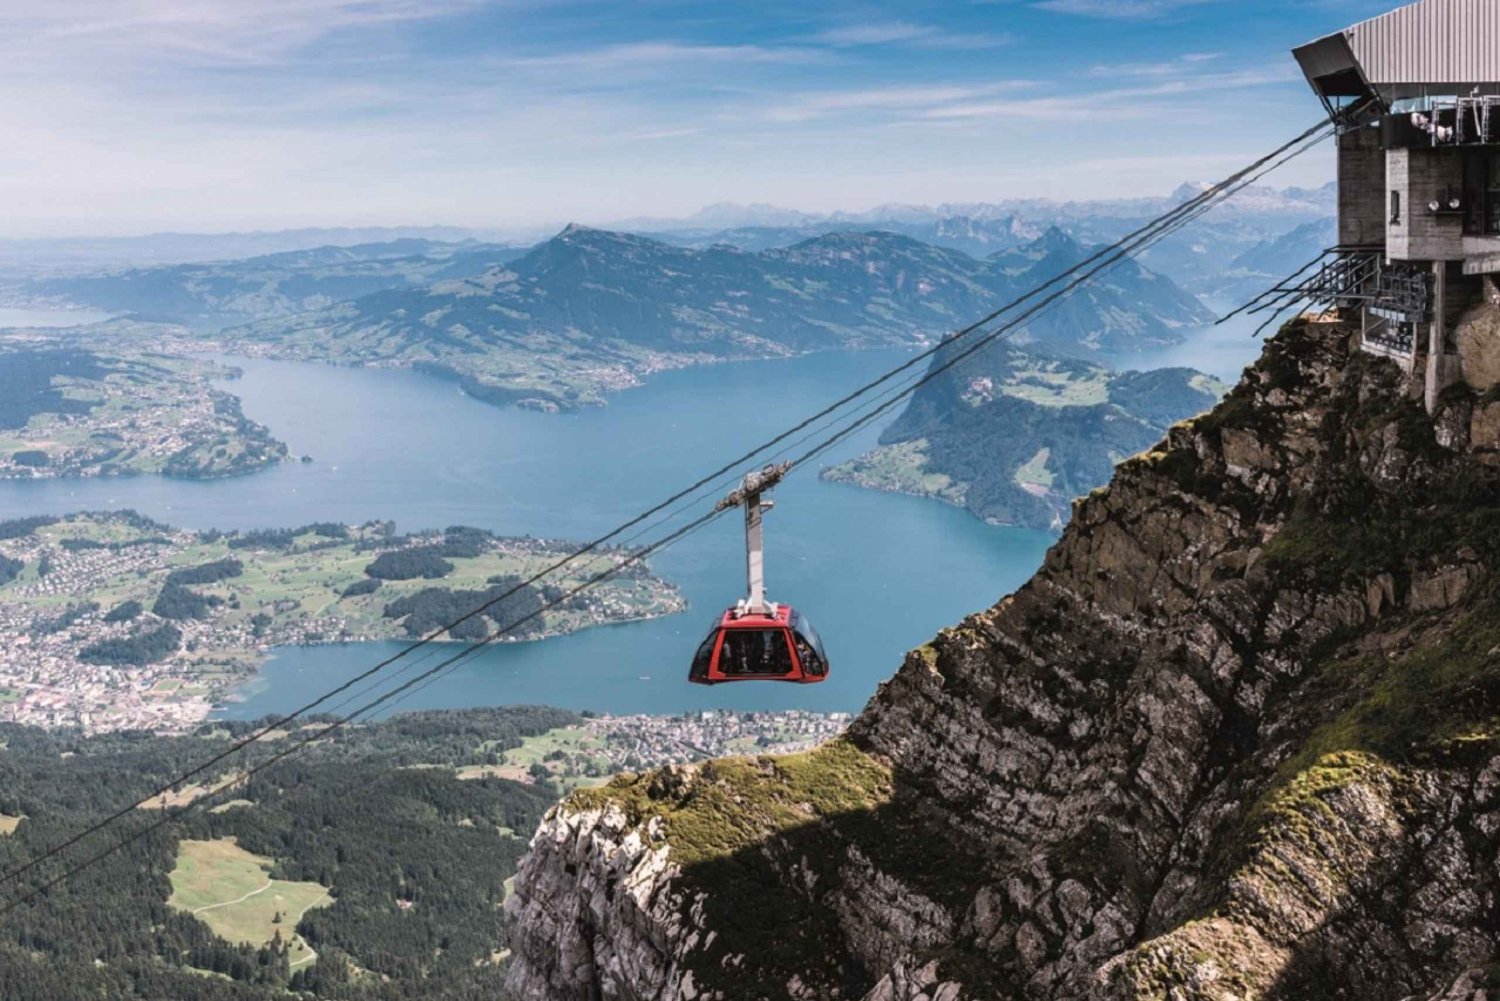 Mt. Pilatus and Mt. Titlis 2-Day Tour from Zurich